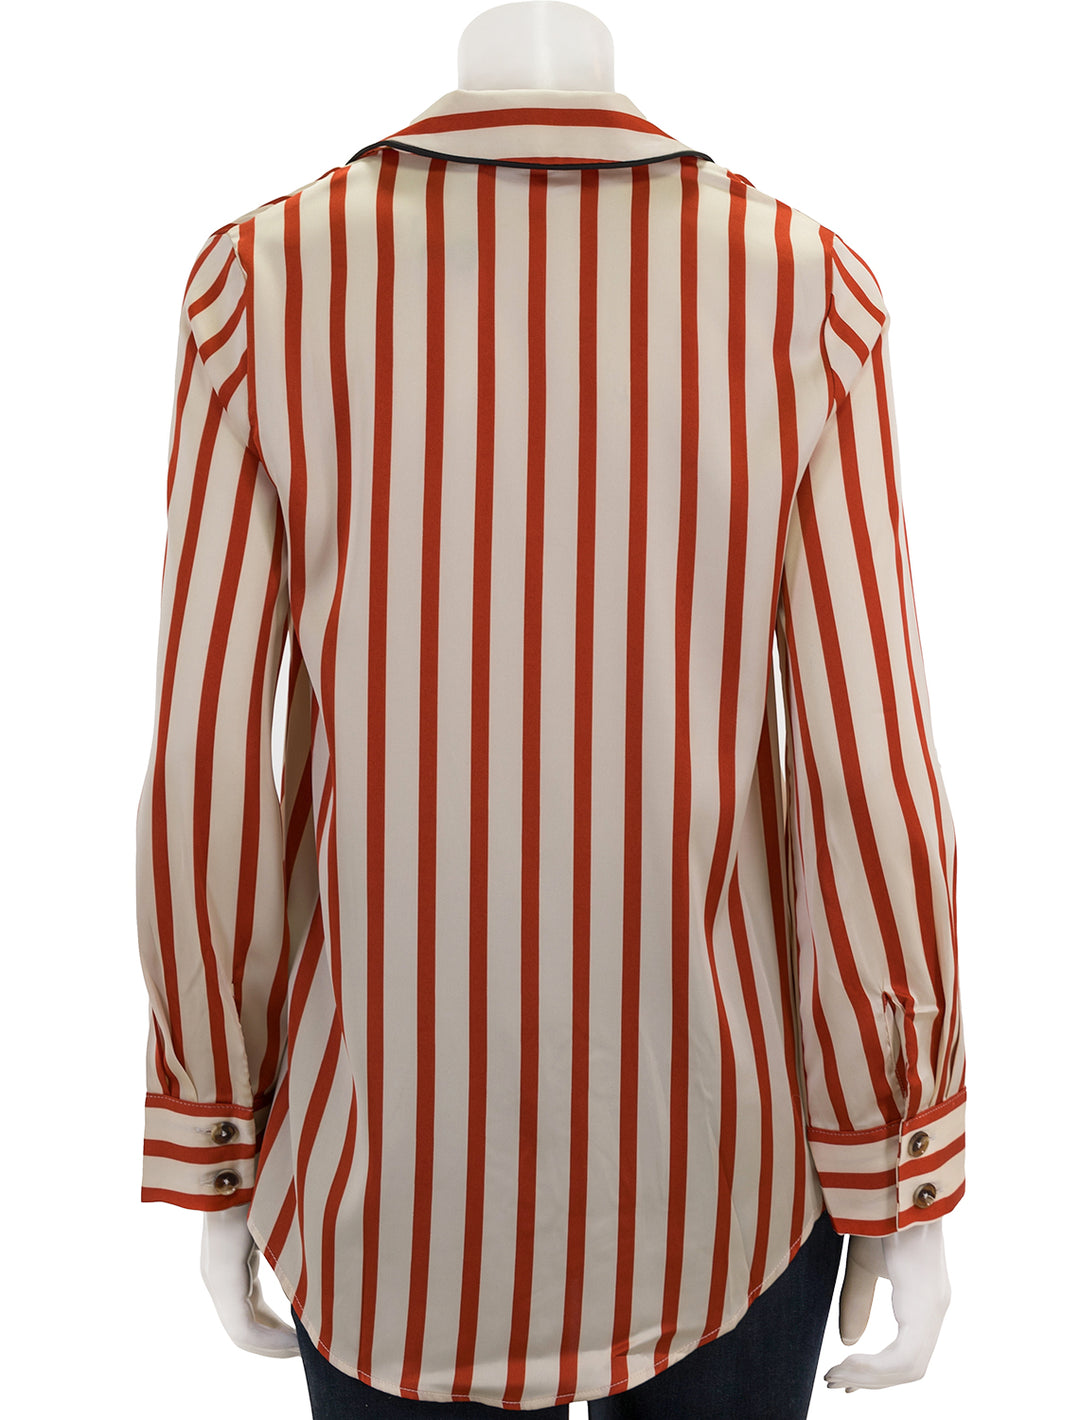 Back view of English Factory's striped satin shirt with piping.